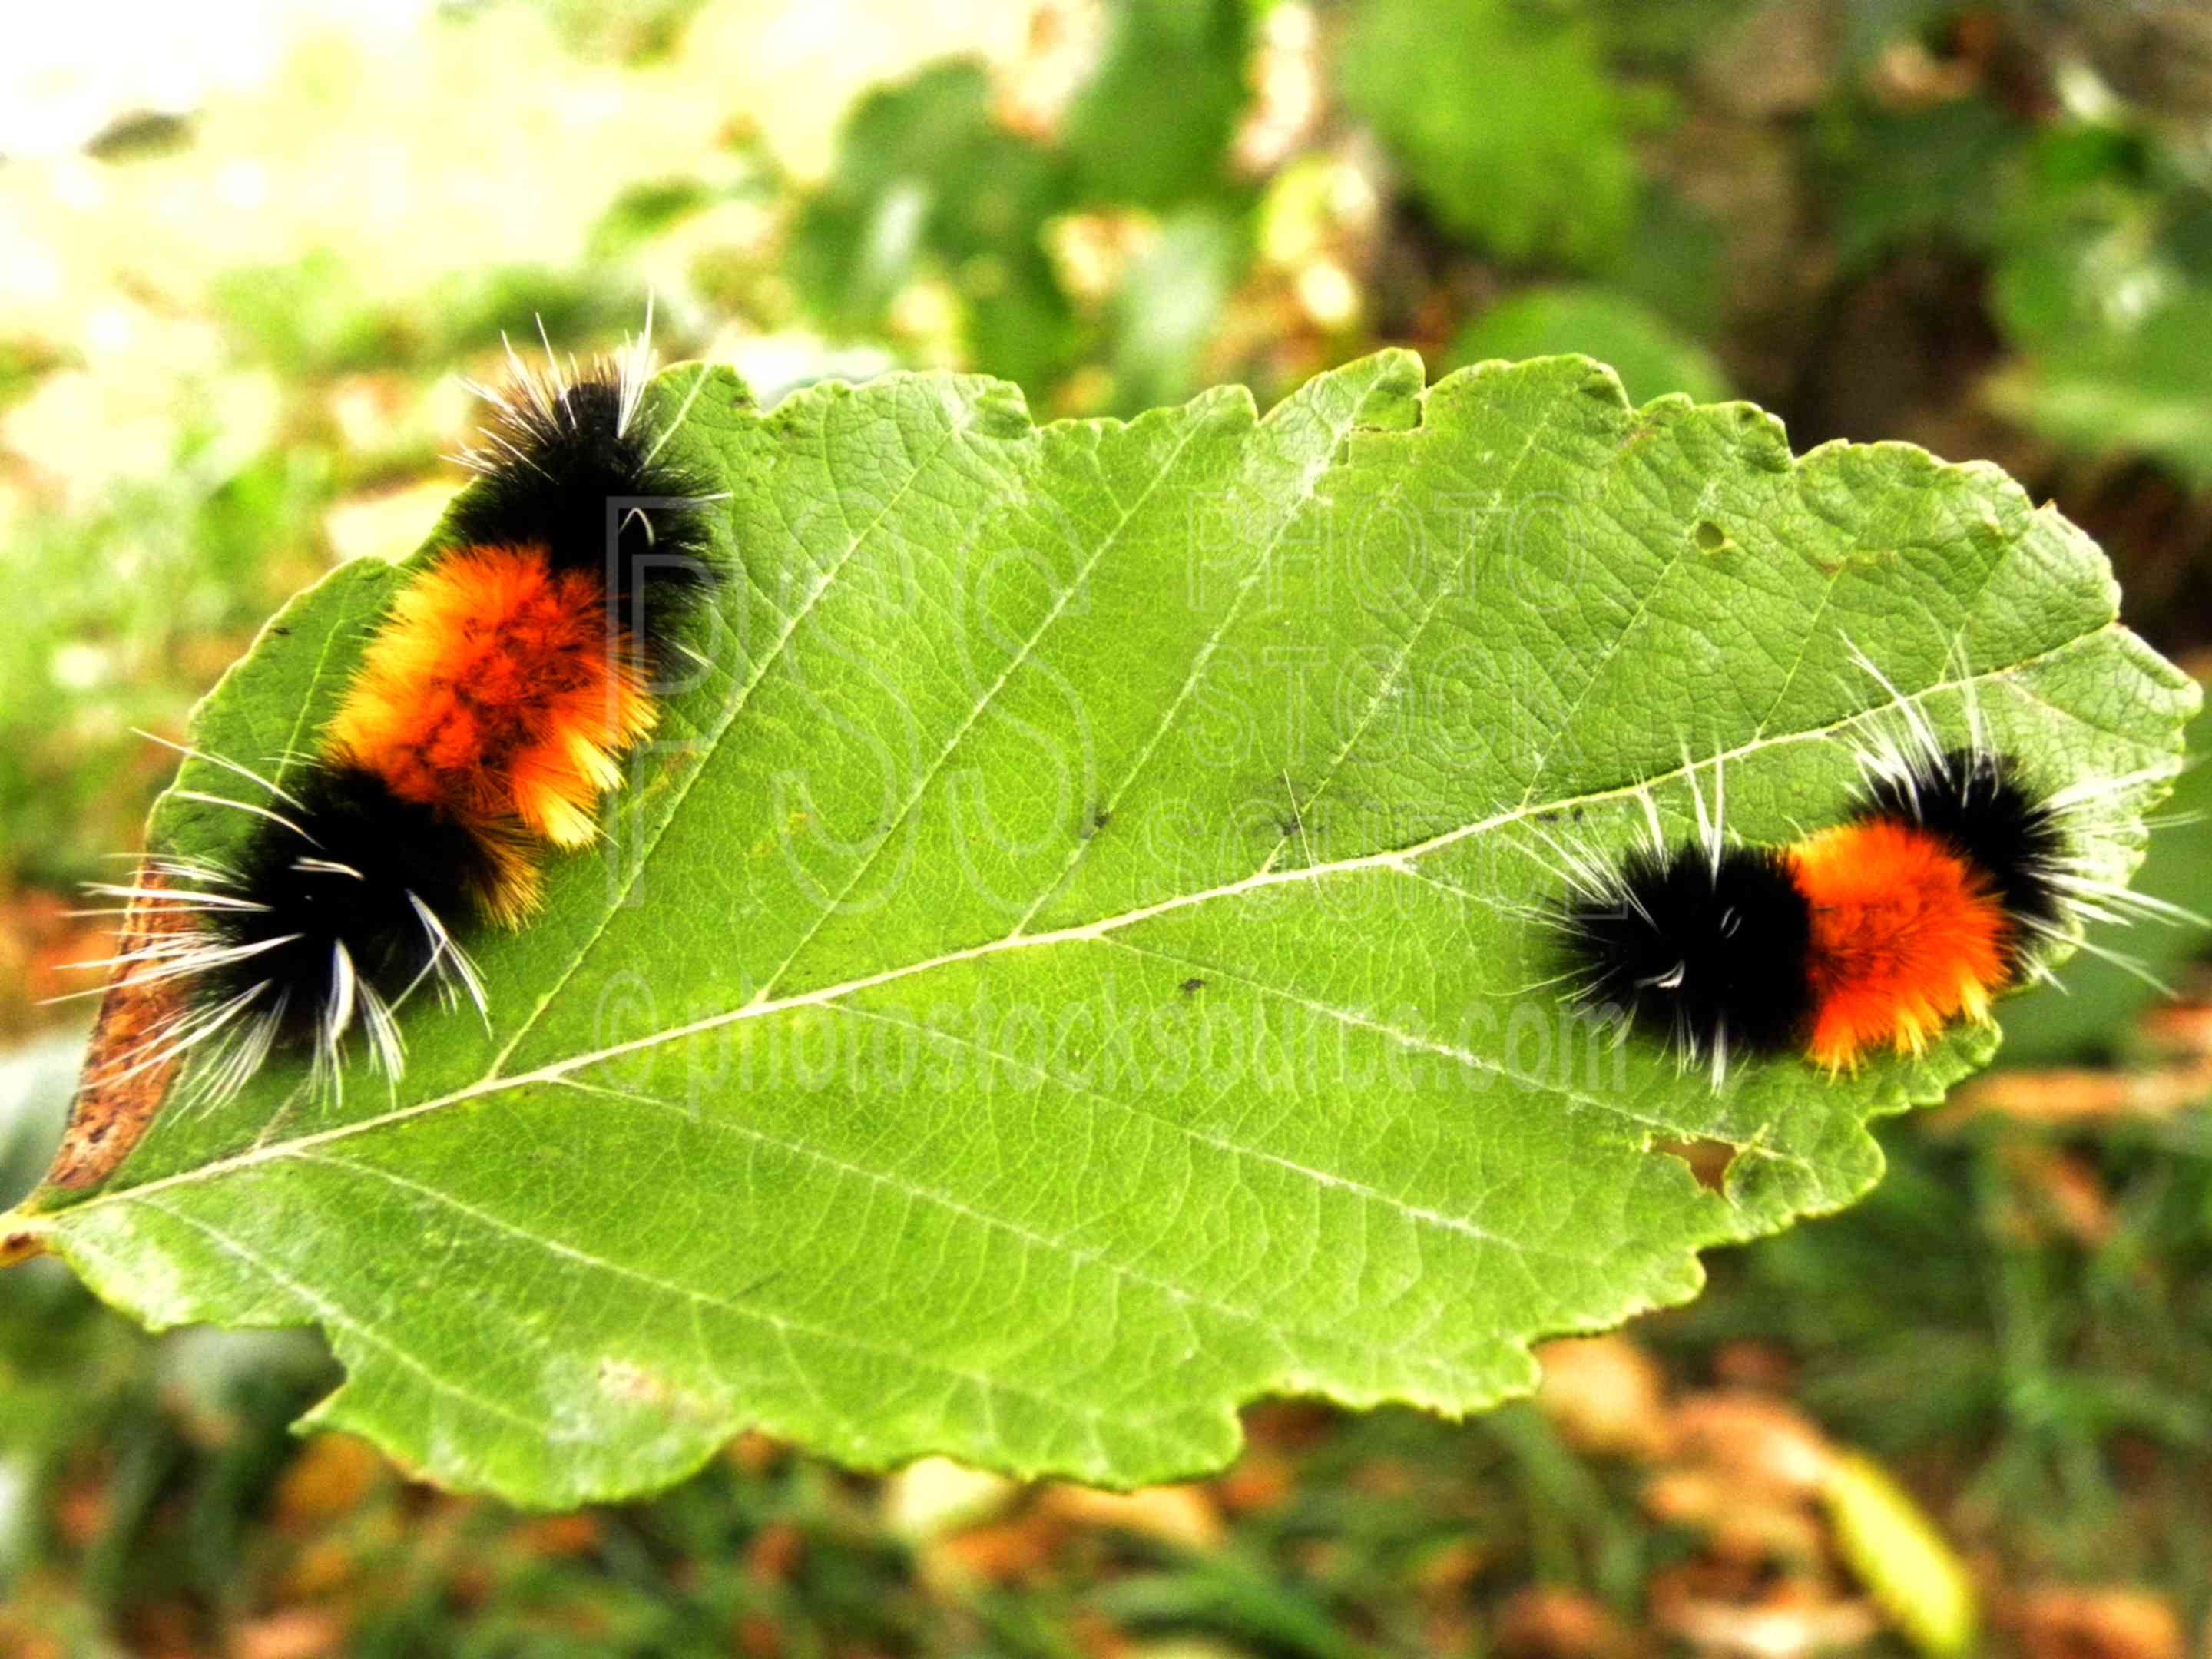 Wooly Bear Caterpillars,bug,insect,leaf,leave,crawling,pyrrharctia isabella